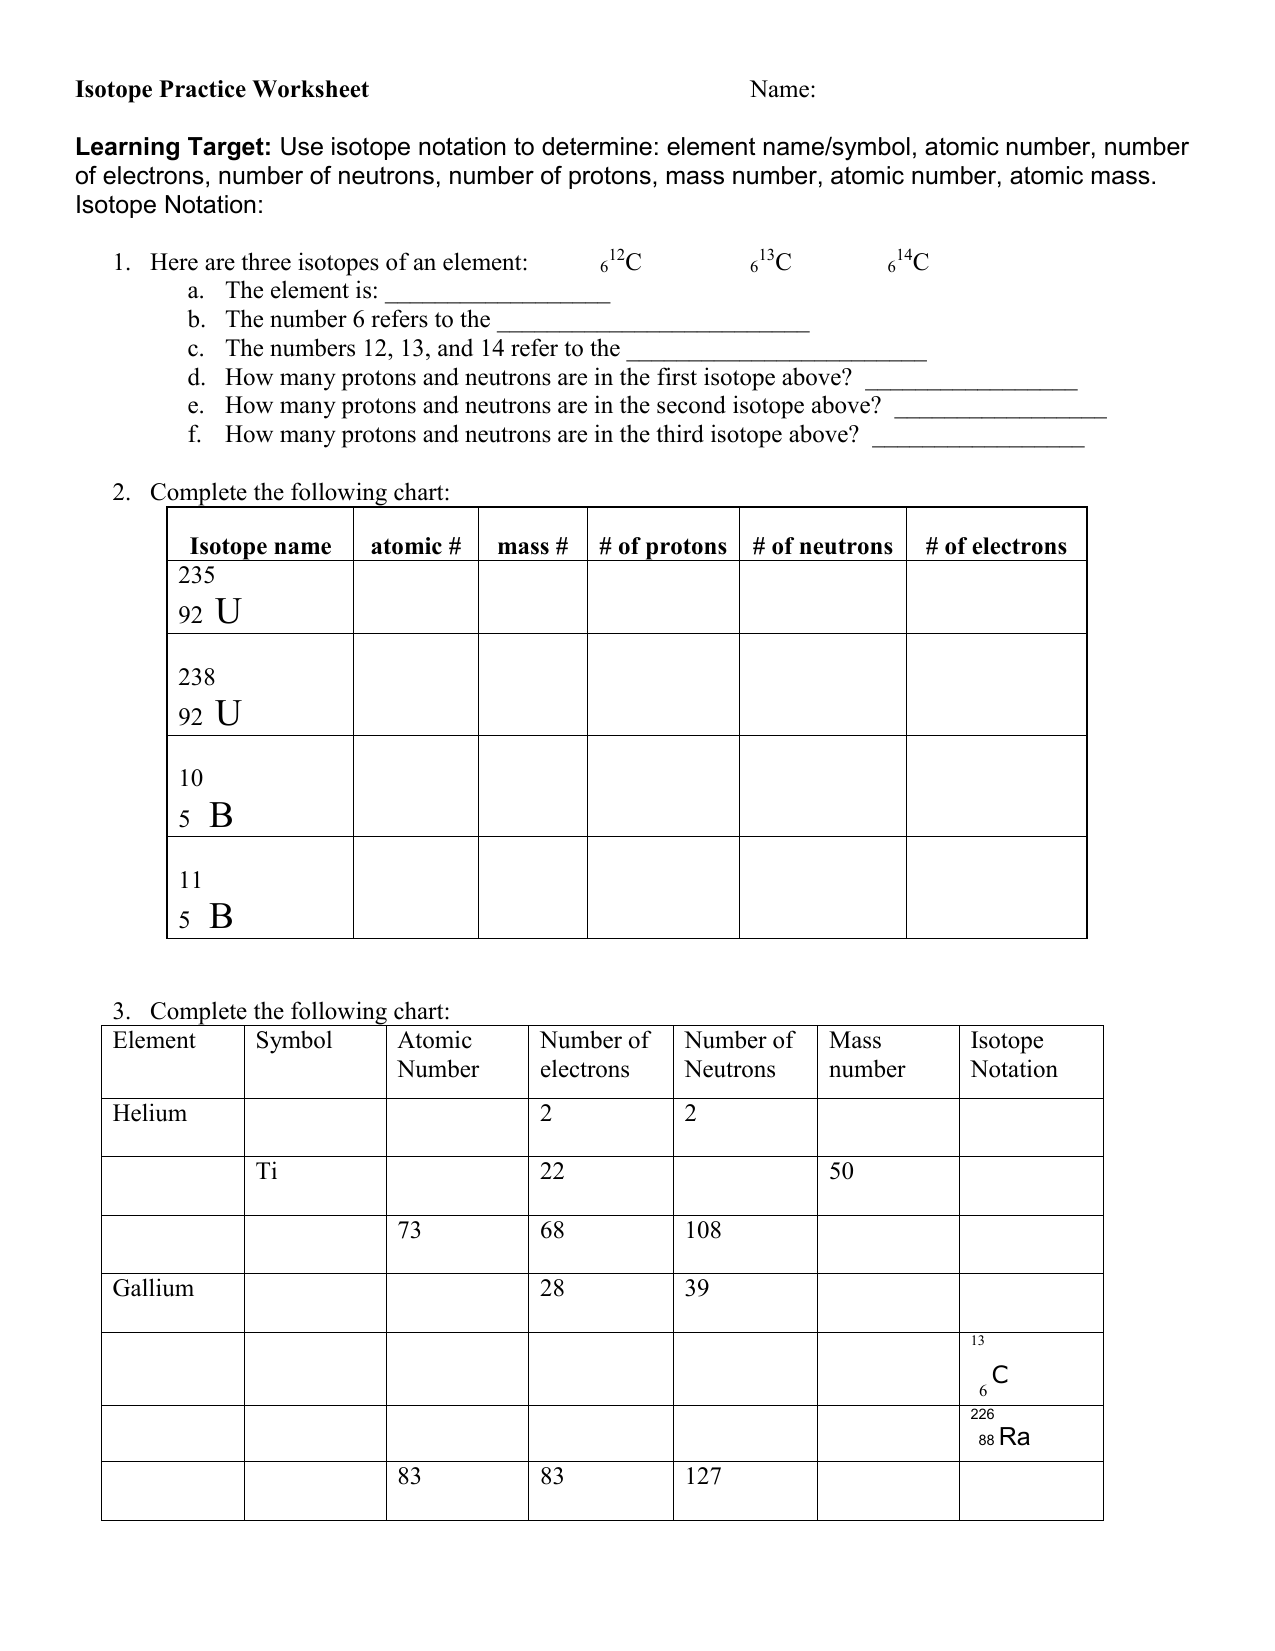 isotope practice - radioactivity21 Intended For Isotope Practice Worksheet Answers